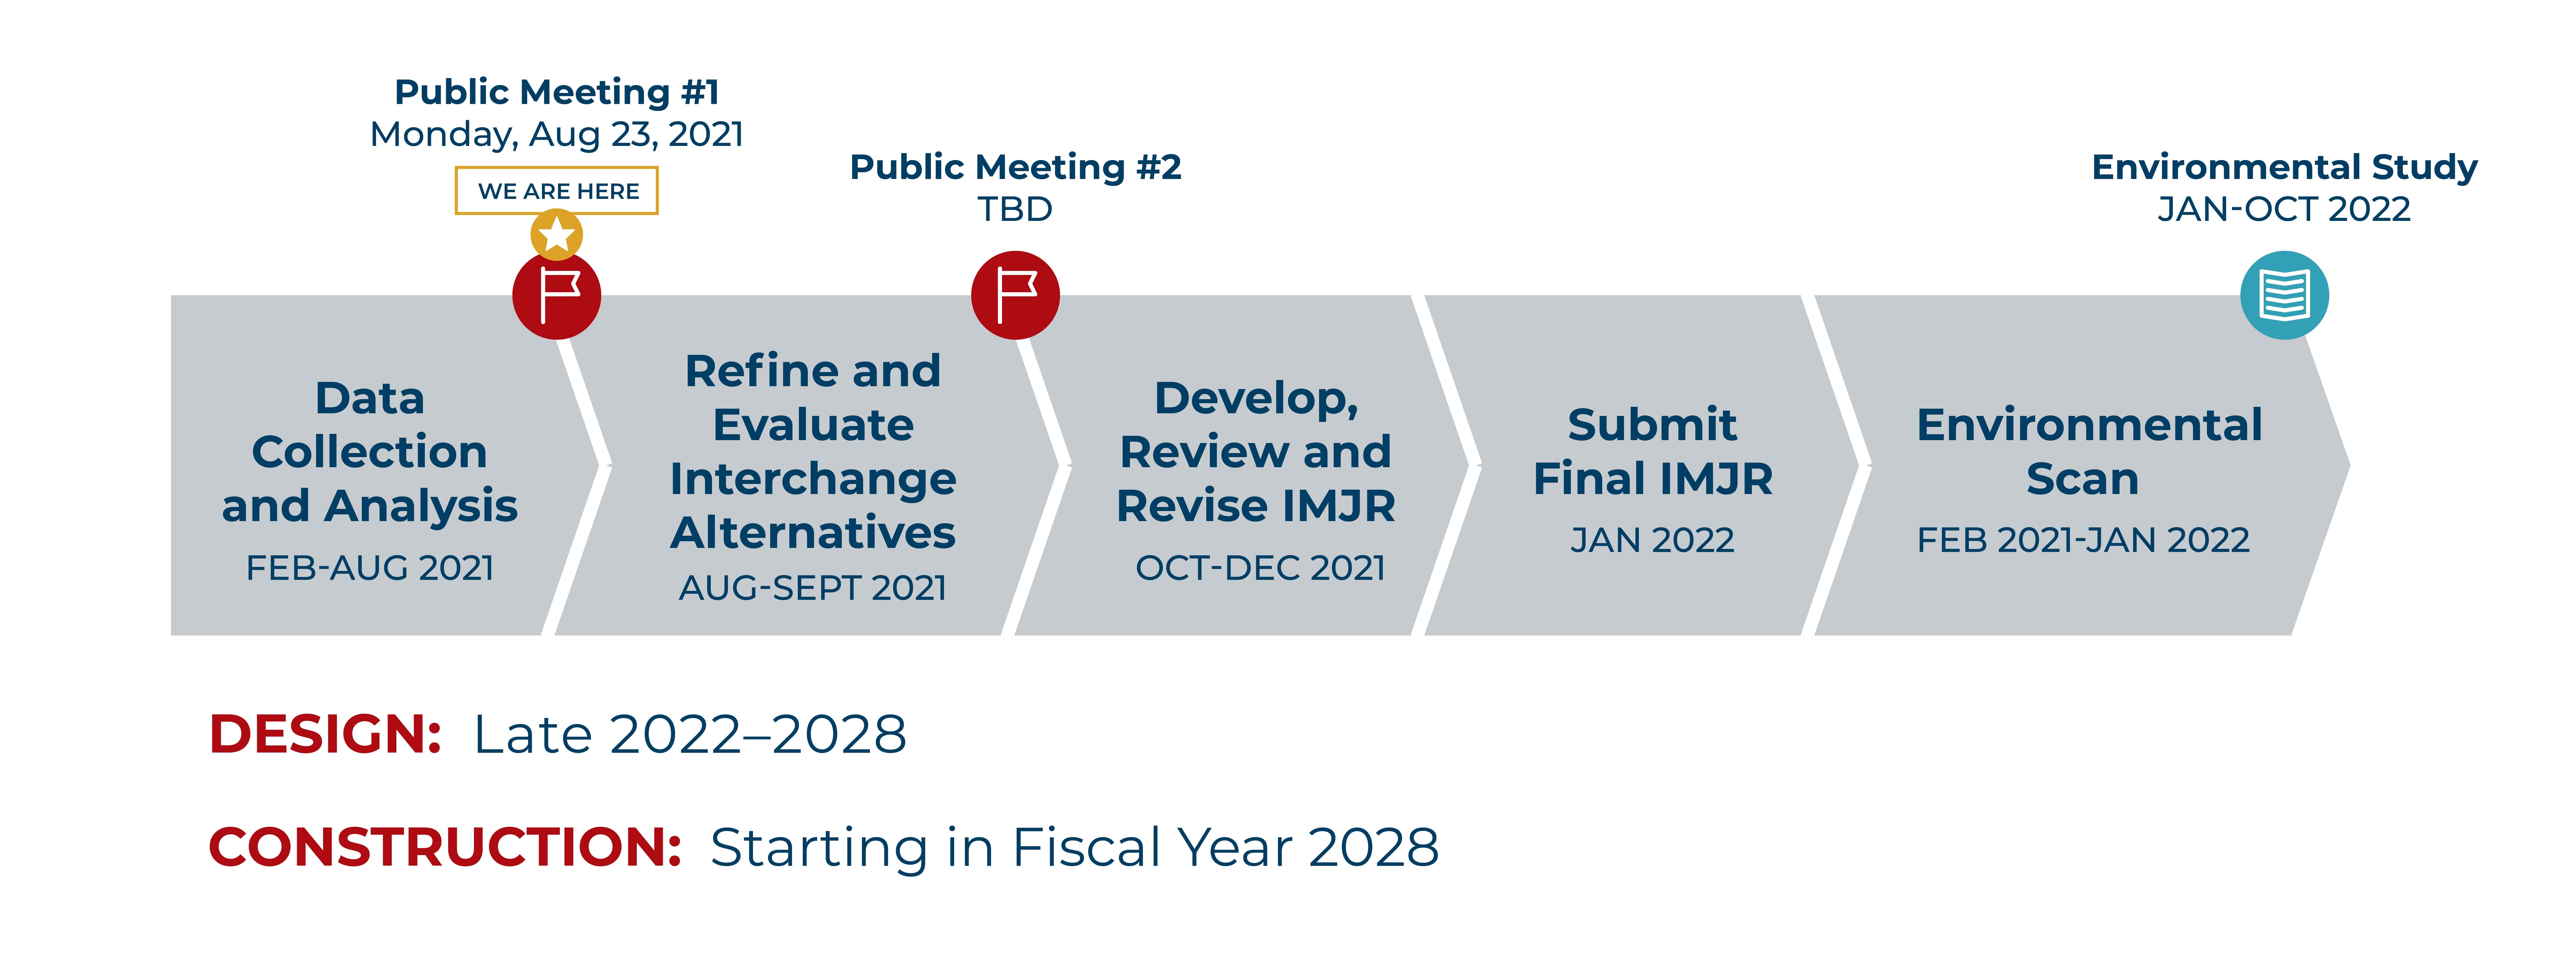 The study schedule shows the anticipated pace of the project. Data collection and analysis will take place from February 2021 to August 2021 with Public Meeting #1 taking place on Monday, August 23, 2021. The interchange alternatives will be refined and evaluated from August 2021 to September 2021 with Public Meeting #2 taking place shortly after this process is completed. The IMJR will be developed, reviewed, and revised in October through December of 2021. The final IMJR will be submitted in January 2022. An environmental scan will be conducted from February 2021 to January 2022 and the subsequent environmental an environmental study from January to October 2022. 